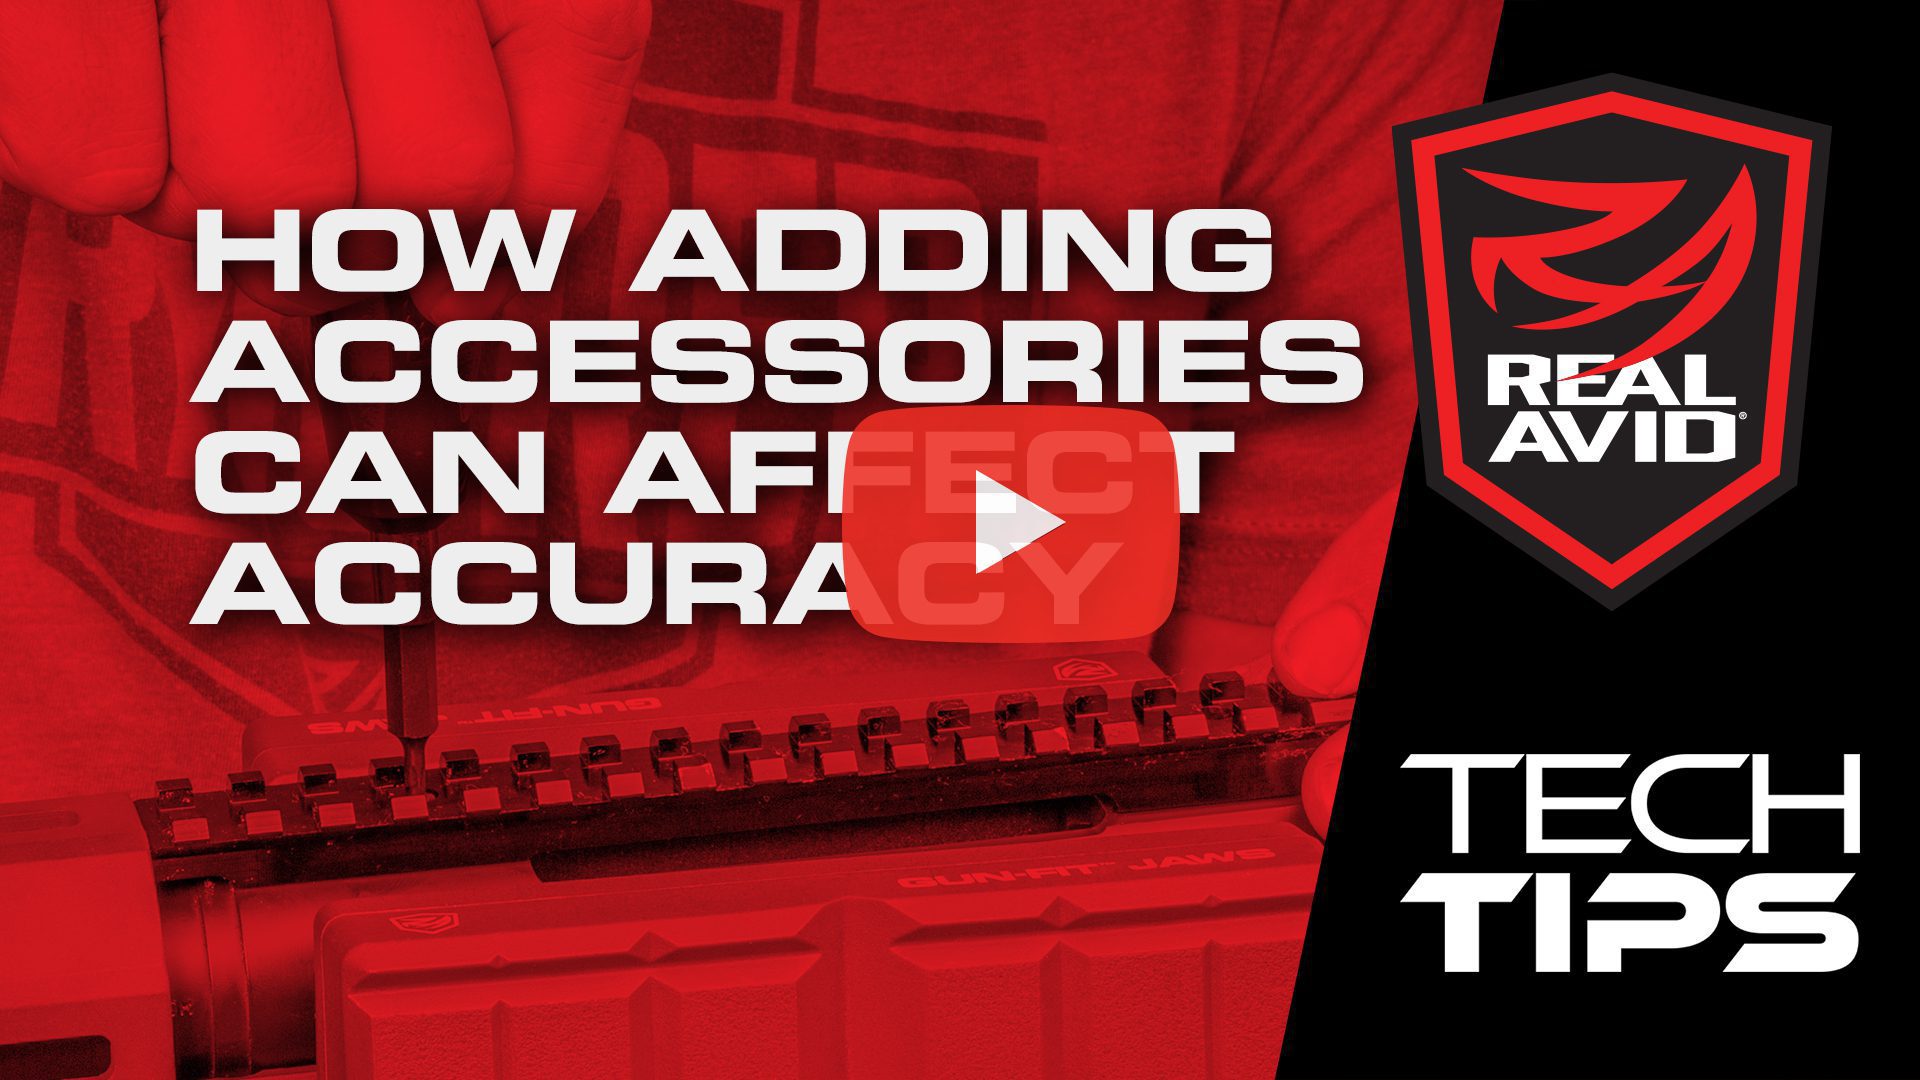 TECH TIPS: How Adding Accessories Can Affect Accuracy